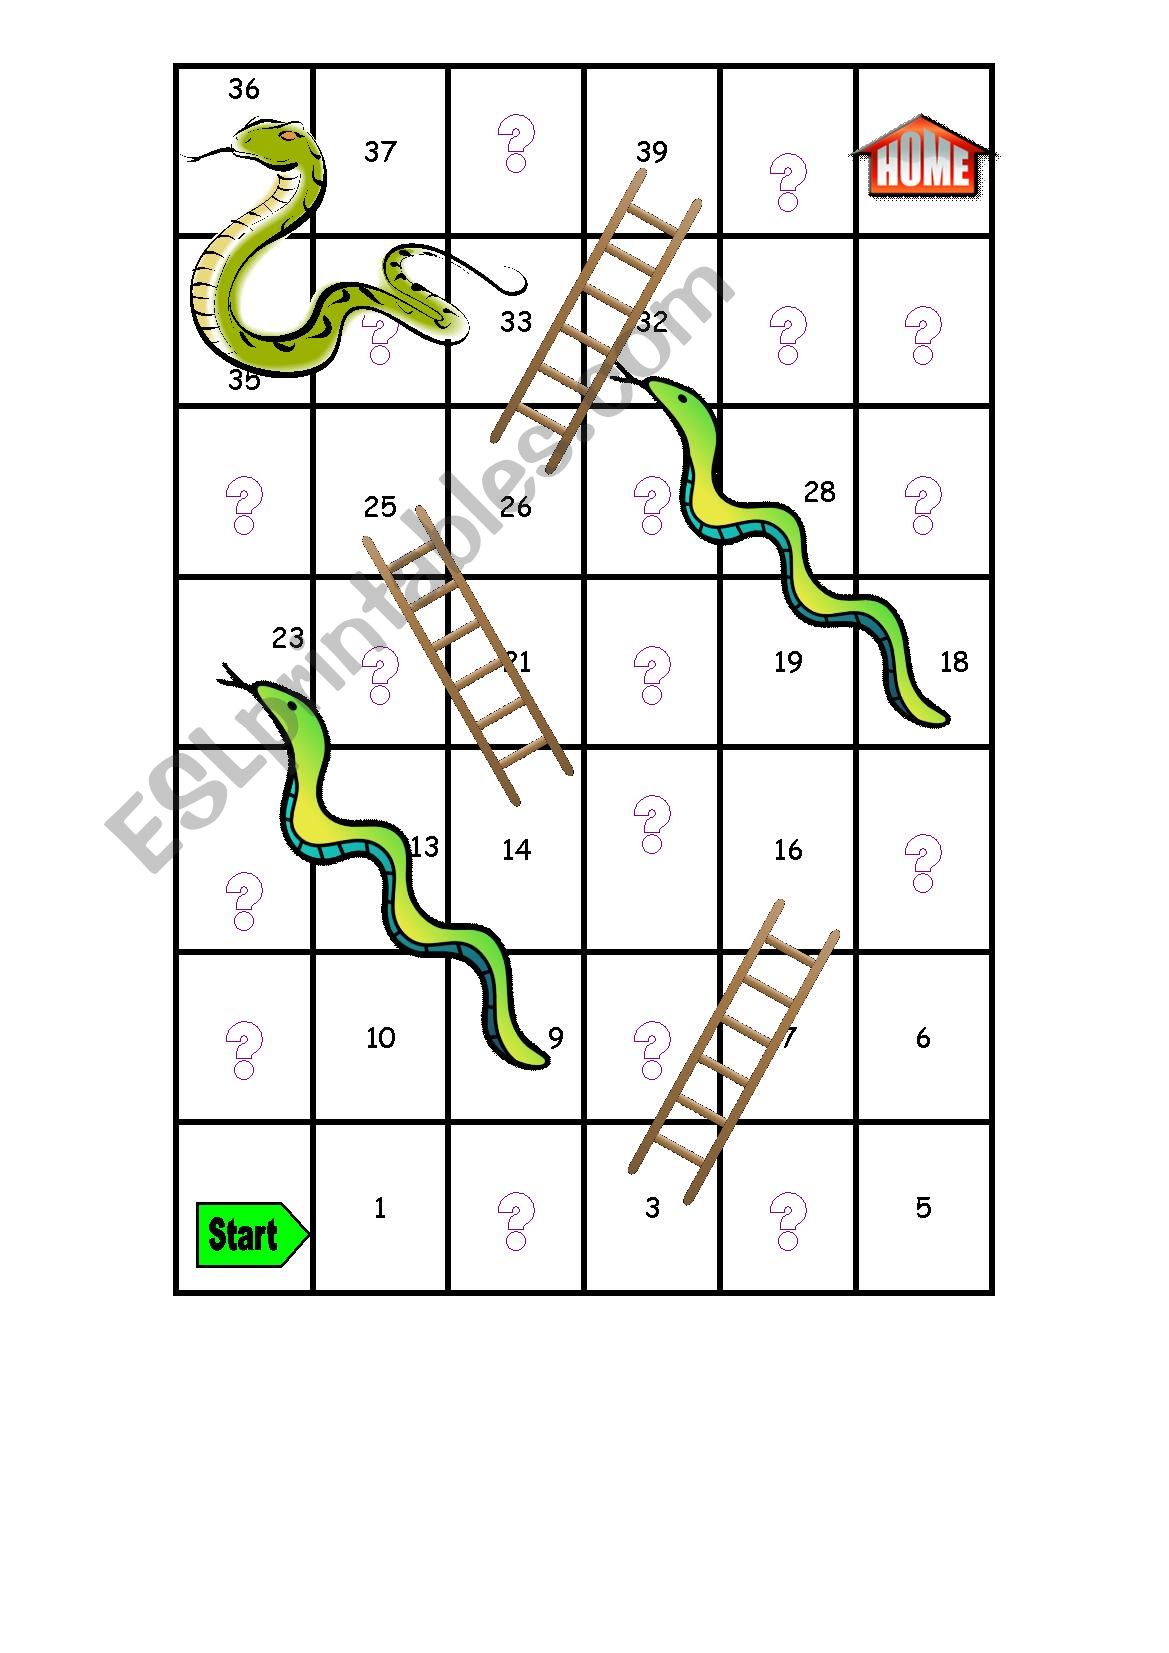 Healthy snakes and ladders worksheet